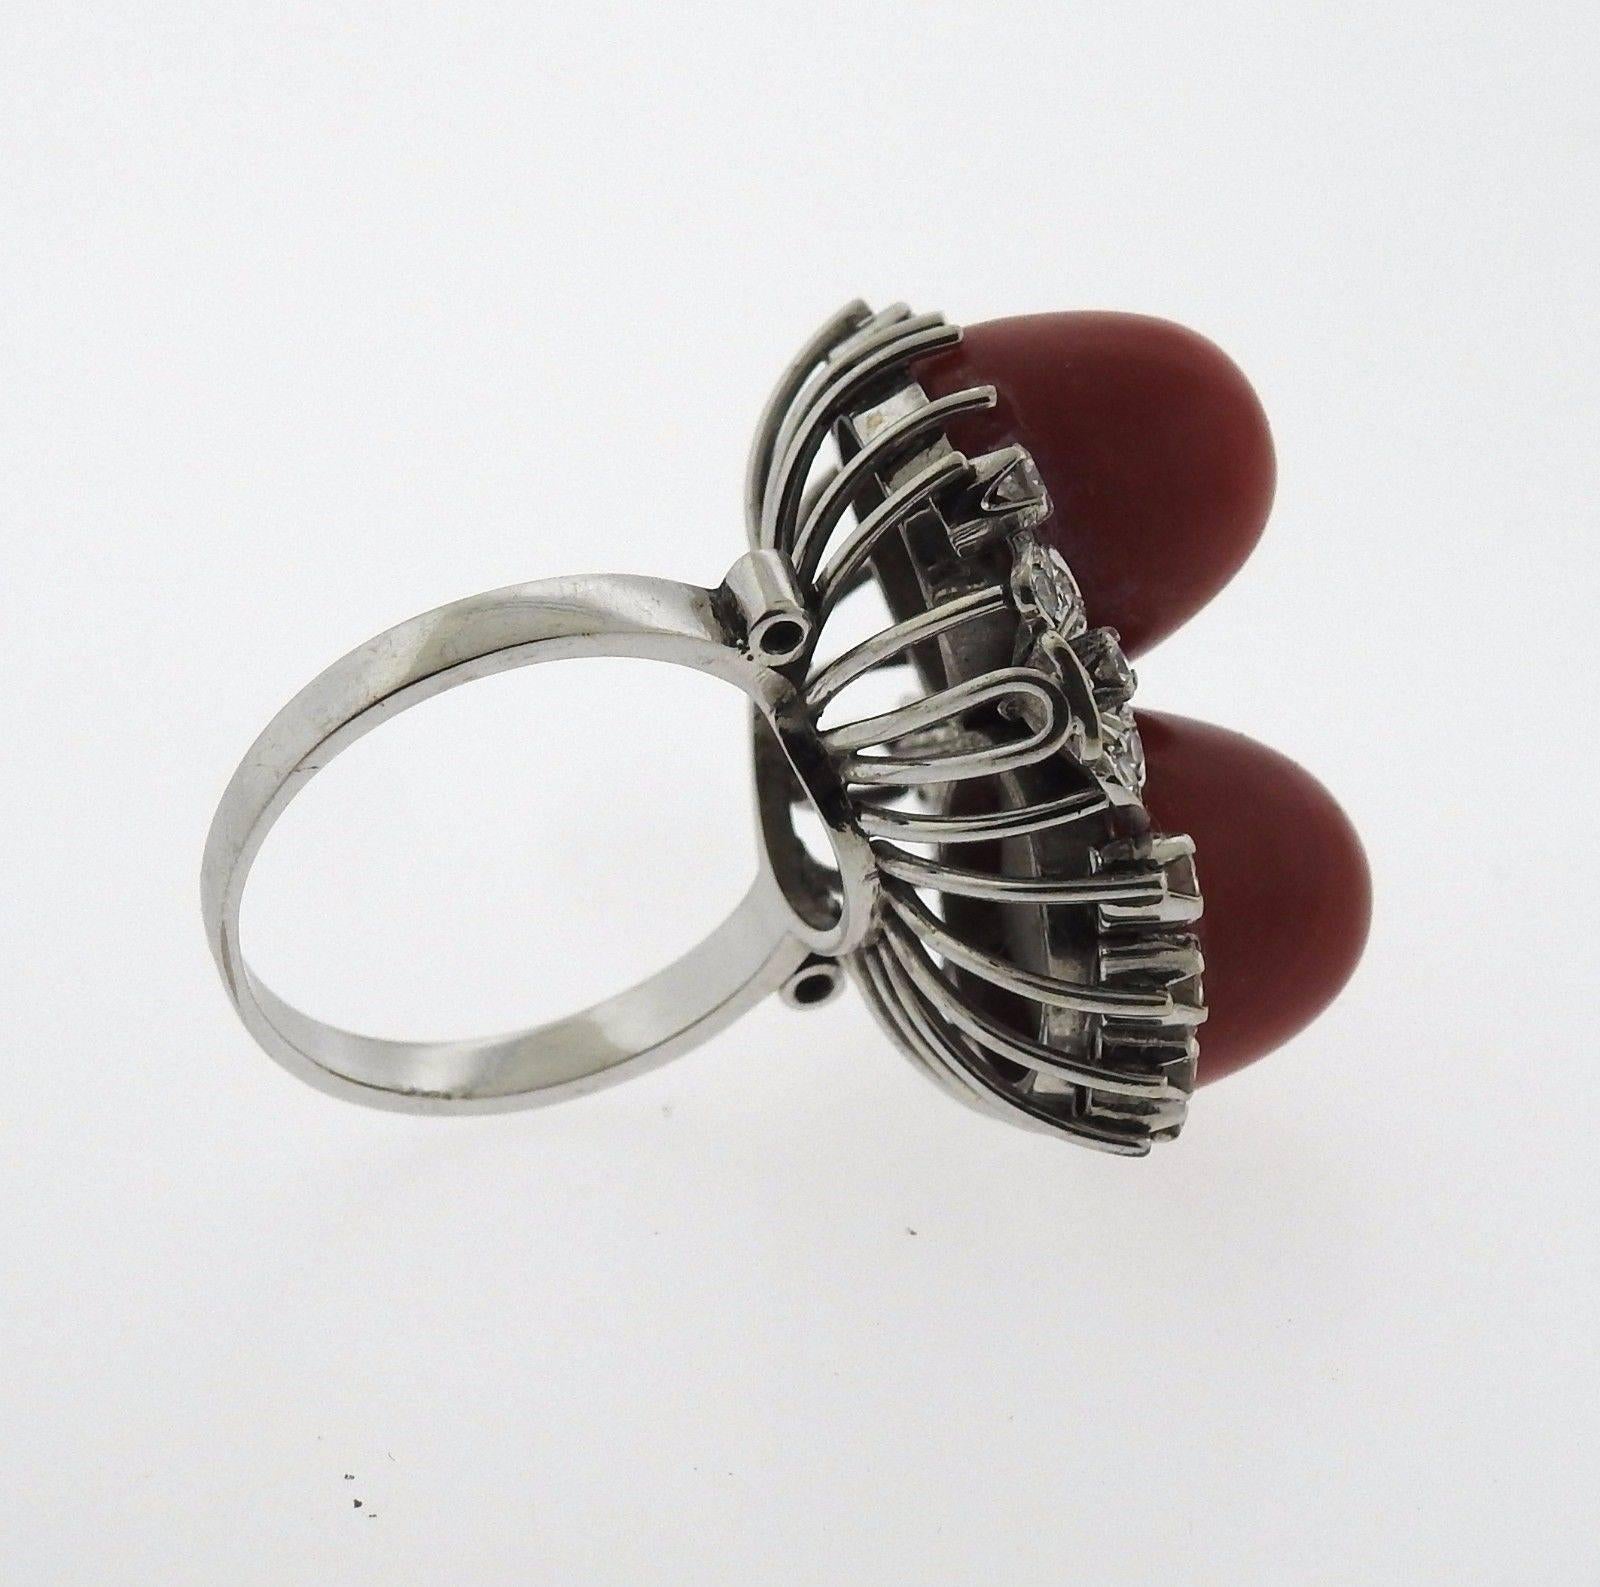 An 18k white gold ring set with coral (12mm x 13mm) and approximately 0.75ctw of H/VS diamonds.  The ring is a size 7.5 and the top measures 28mm x 24mm.  The weight of the piece is 13.5 grams.